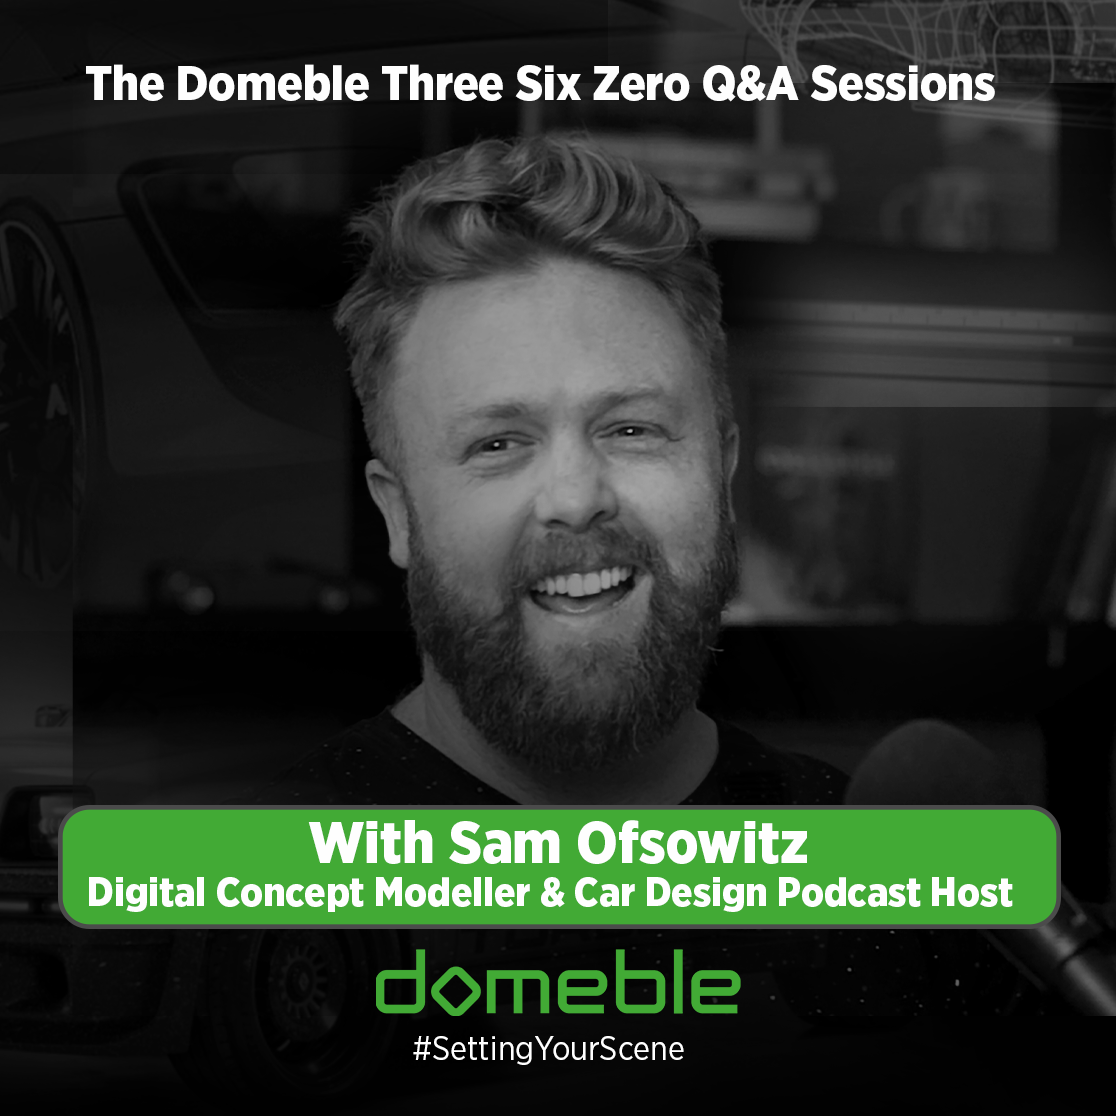 The Domeble Three Six Zero Q&A Sessions: With Sam Ofsowitz